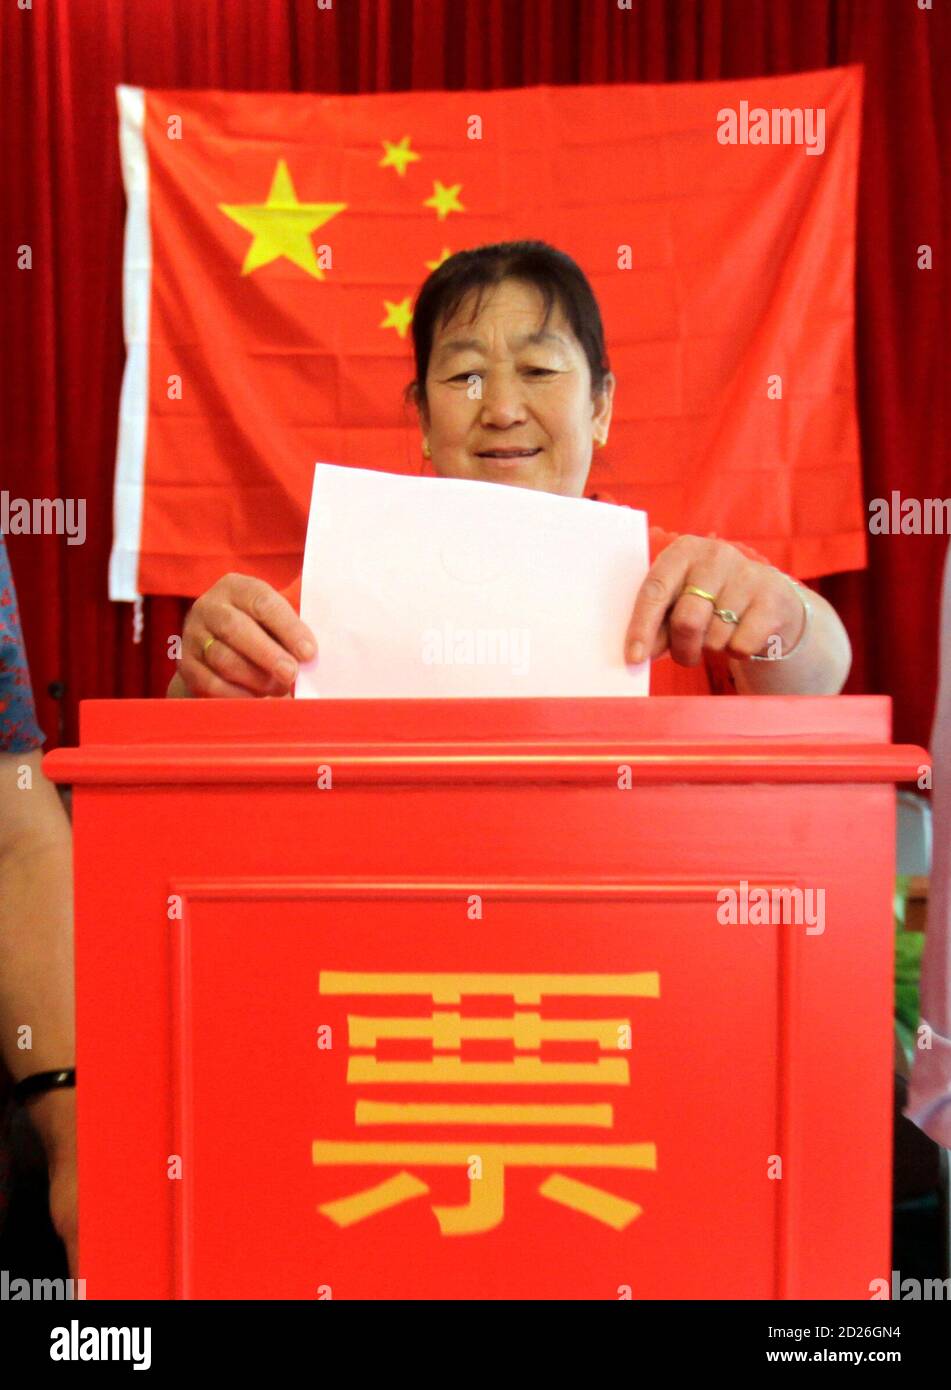 A villager casts a vote during a local election of the villagers' committee at Xiwangping Village in Beijing's Mentougou District June 18, 2010. REUTERS/Jason Lee (CHINA - Tags: POLITICS ELECTIONS) Stock Photo